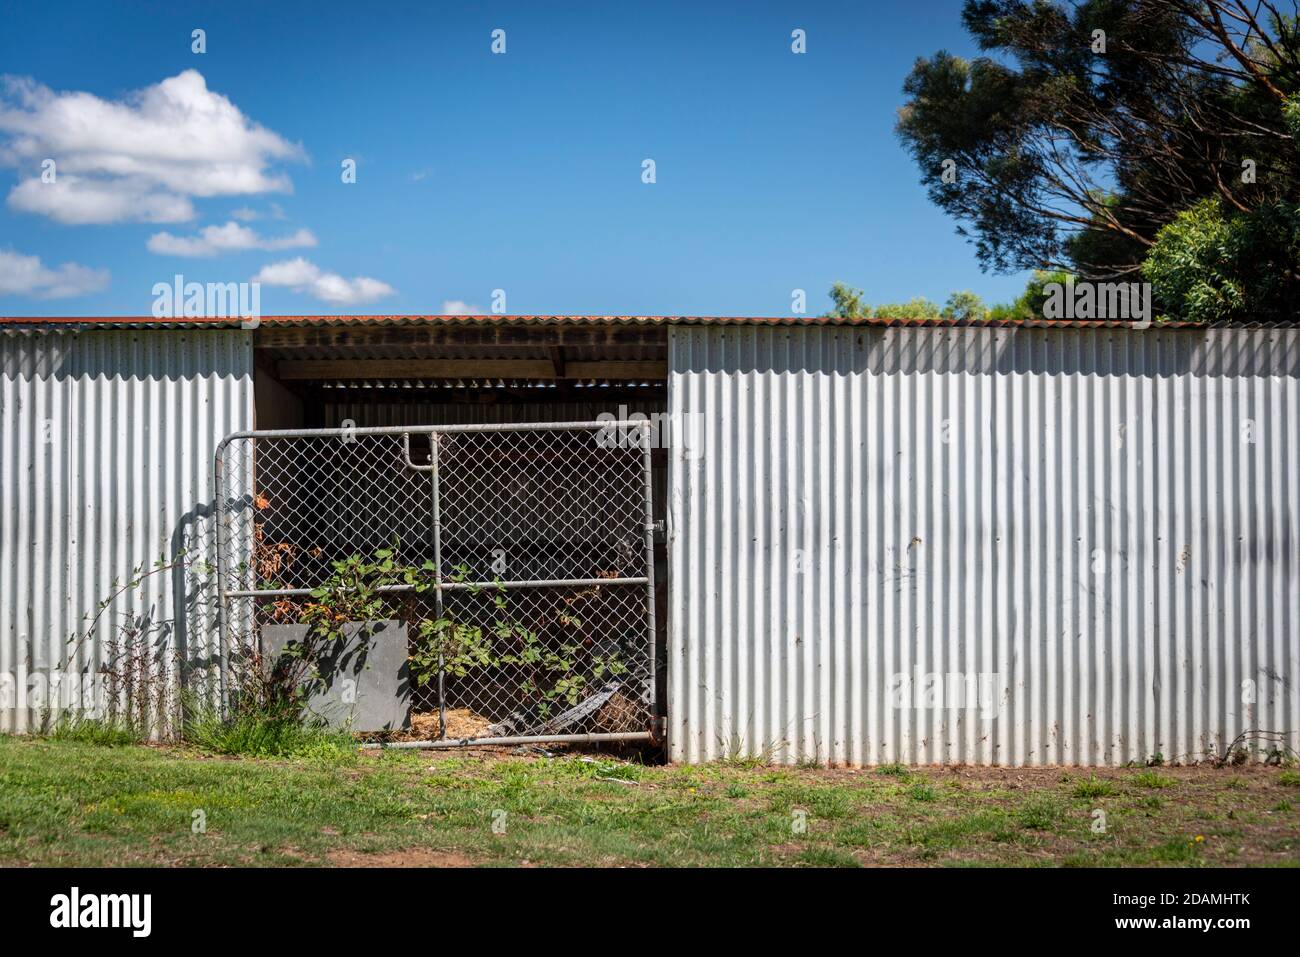 A silver corrugated shed with a tin roof and metal gate overgrown with vine against a blue sky with clouds Stock Photo